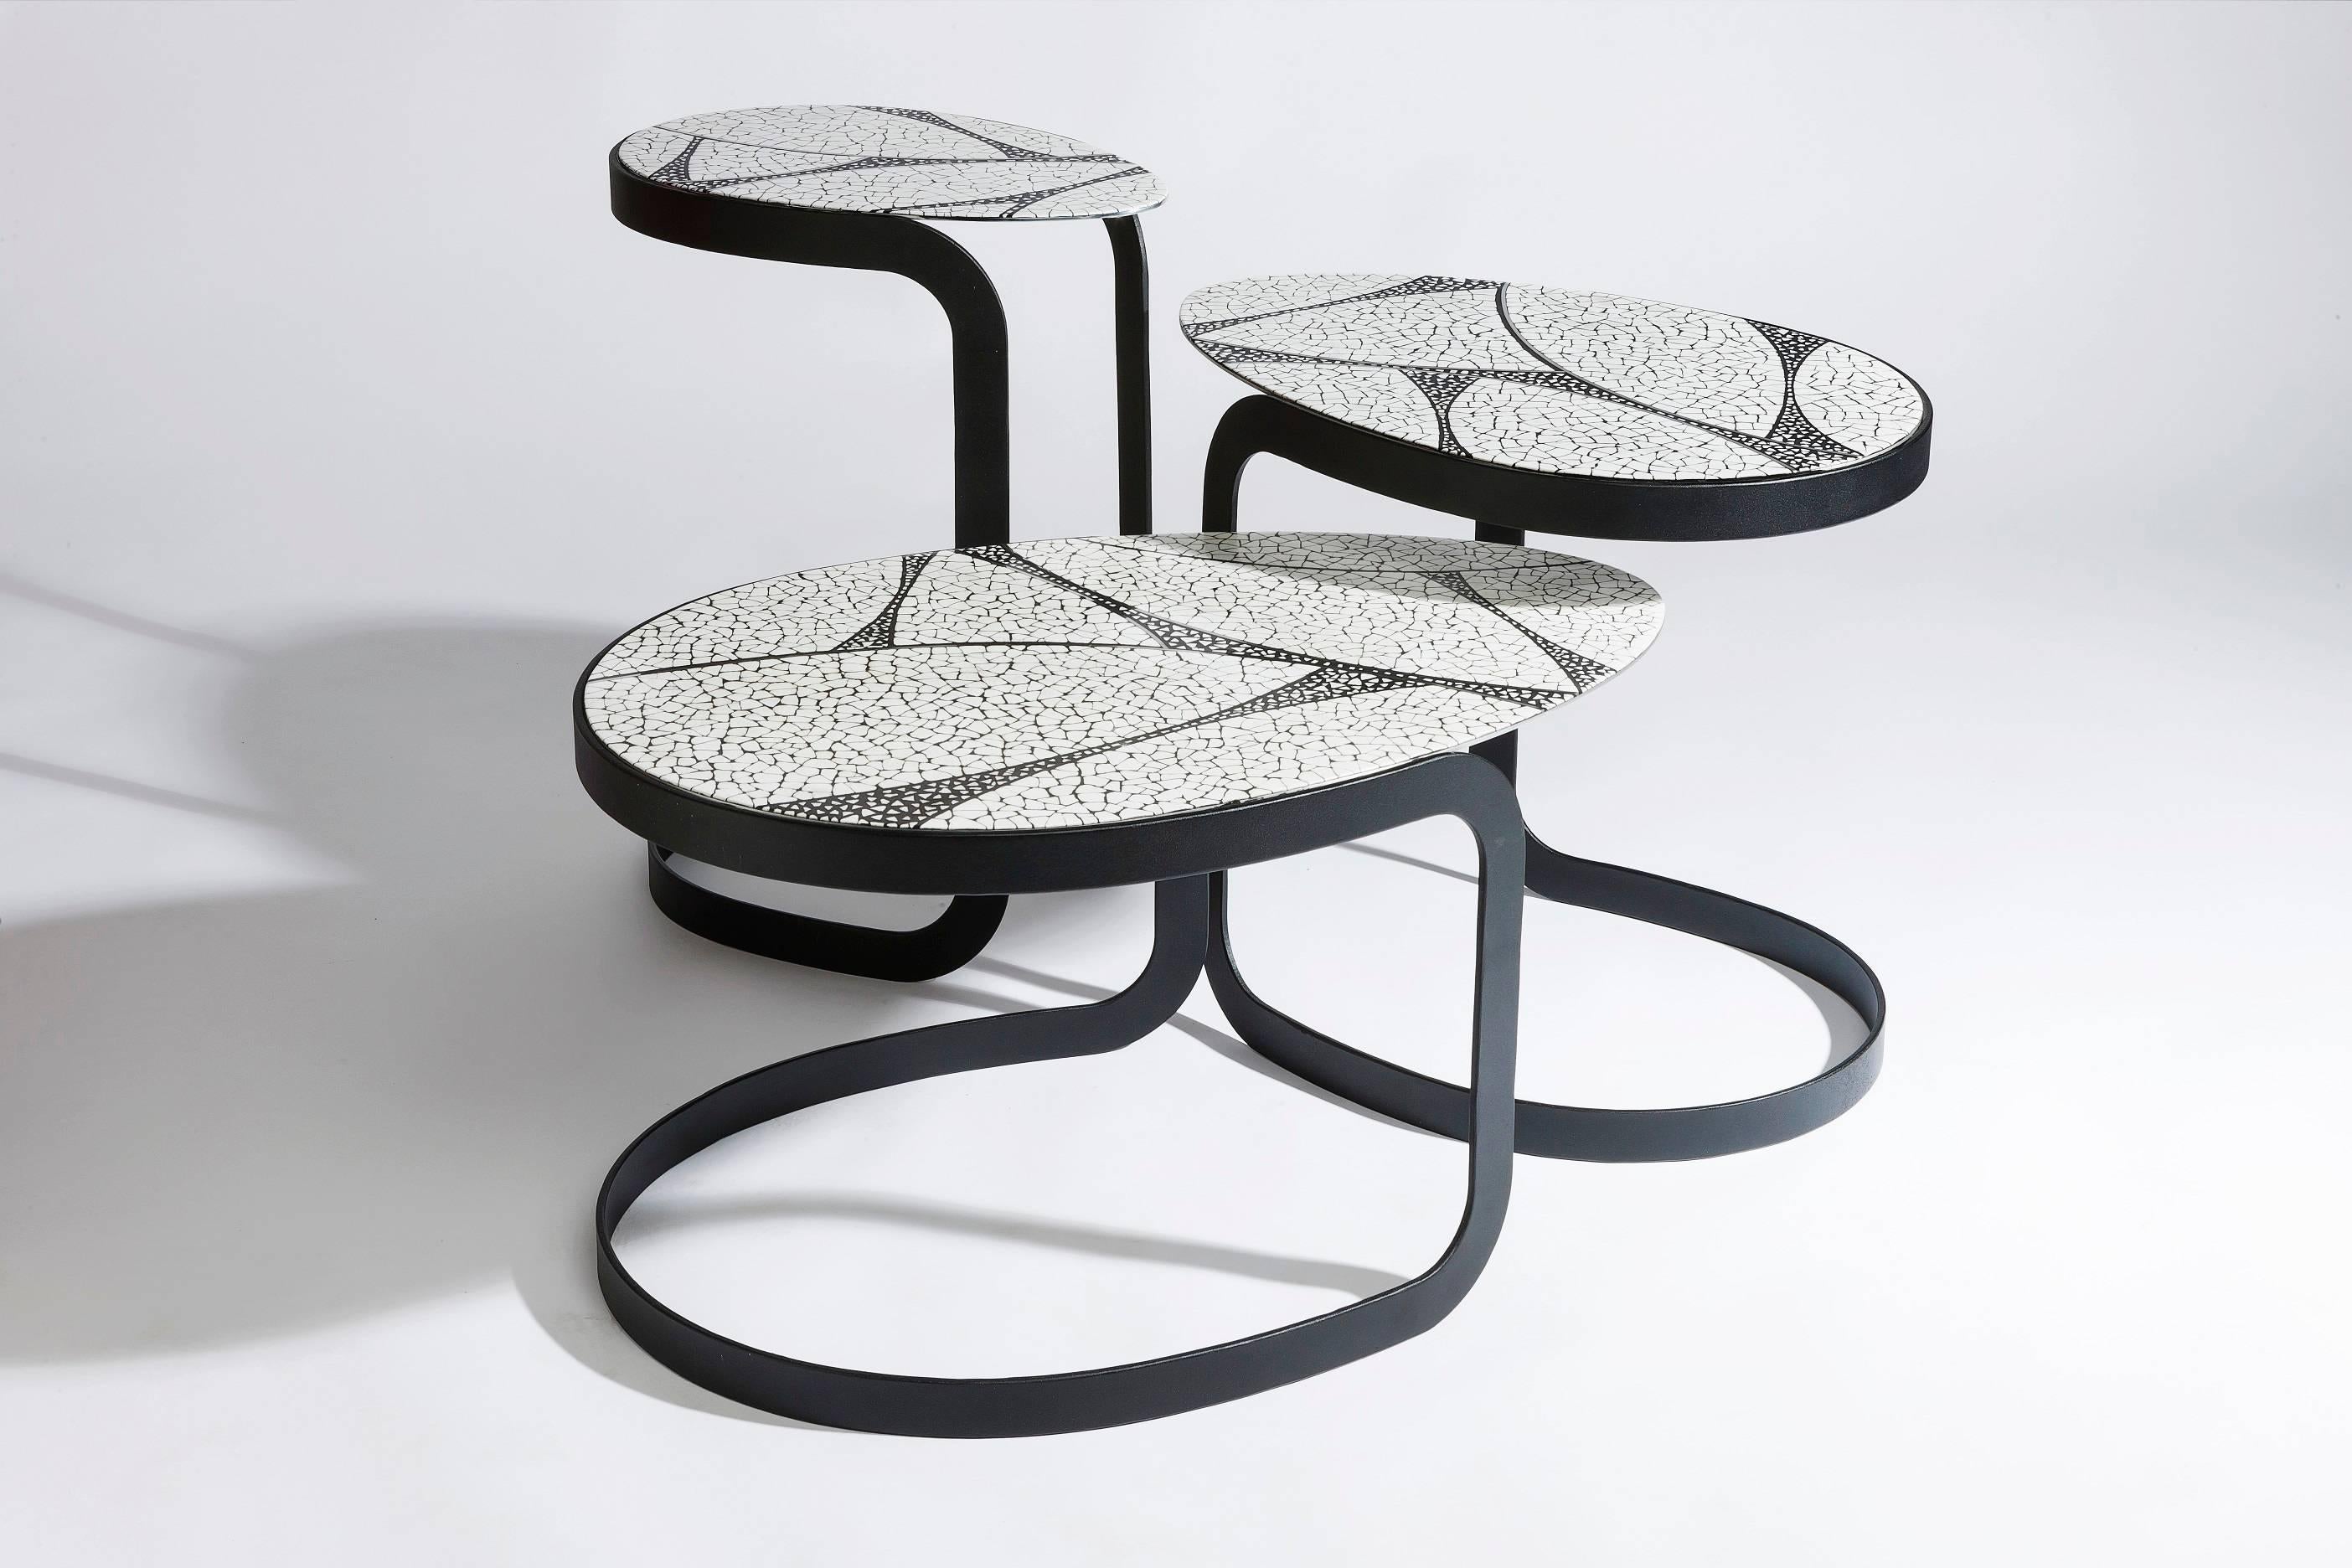 Nest of Egg tables, their tops covered in a veneer of ostrich eggshell sits on a steel base in a black sandpaper finish, sold individually or as a set. Price and details shown are for the smallest in the set, which is also the tallest. Tables have